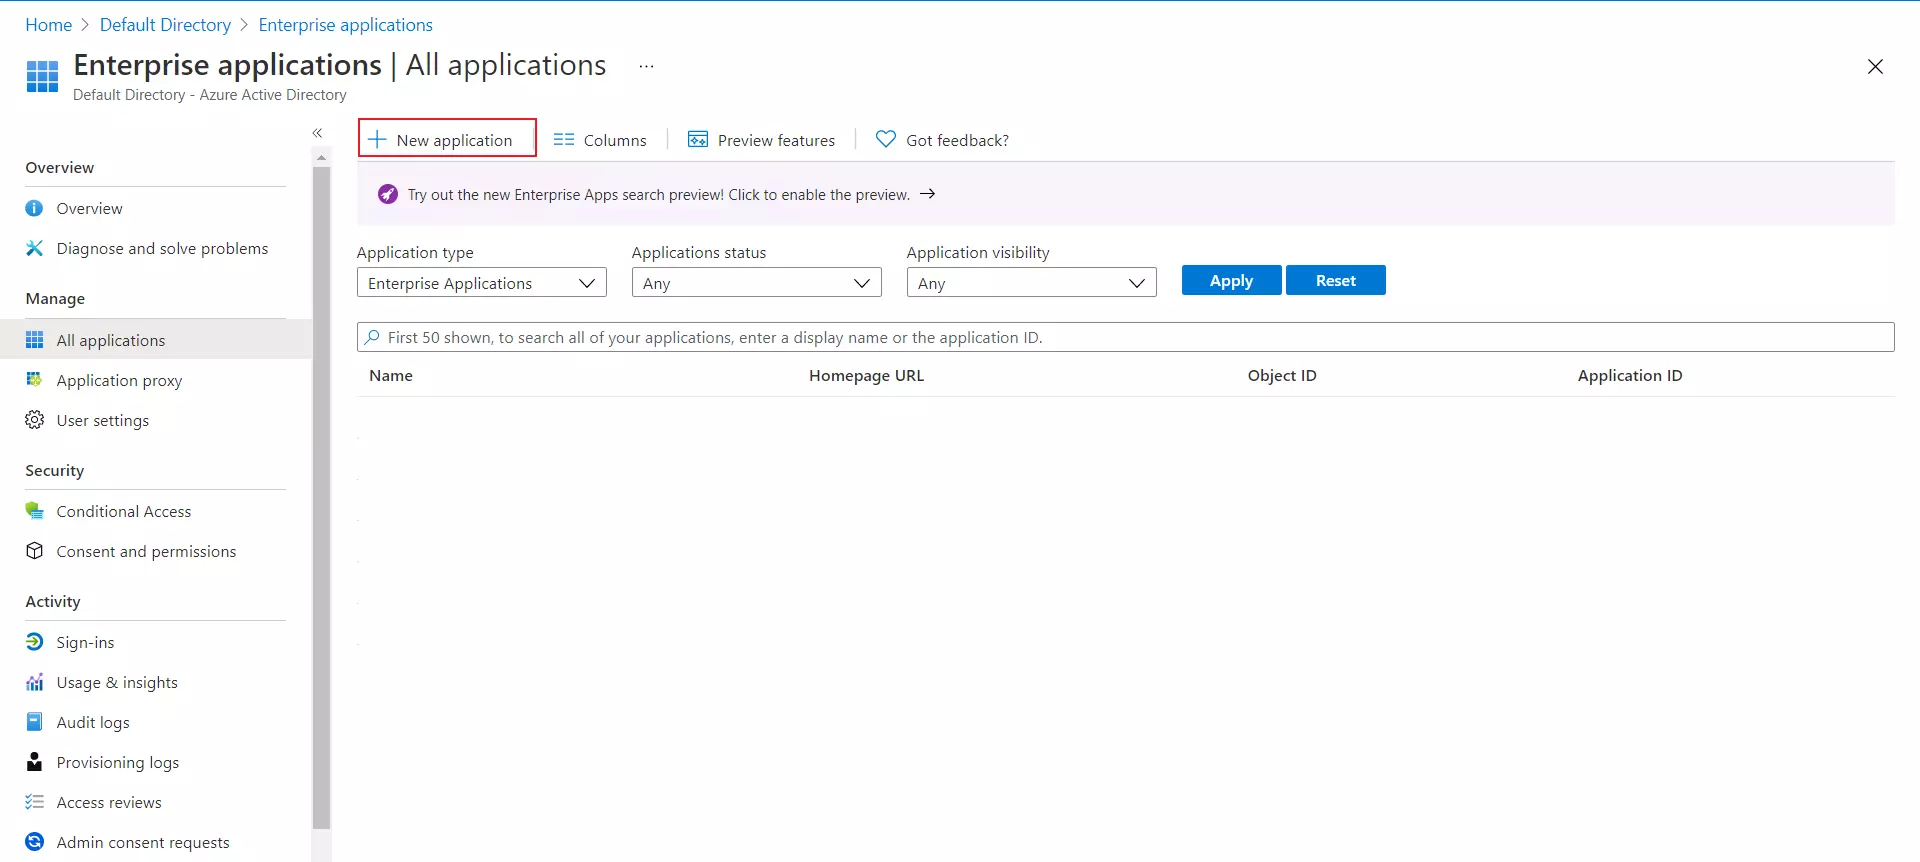 nopCommerce Single Sign-On (SSO) using Azure AD as IDP - New Application